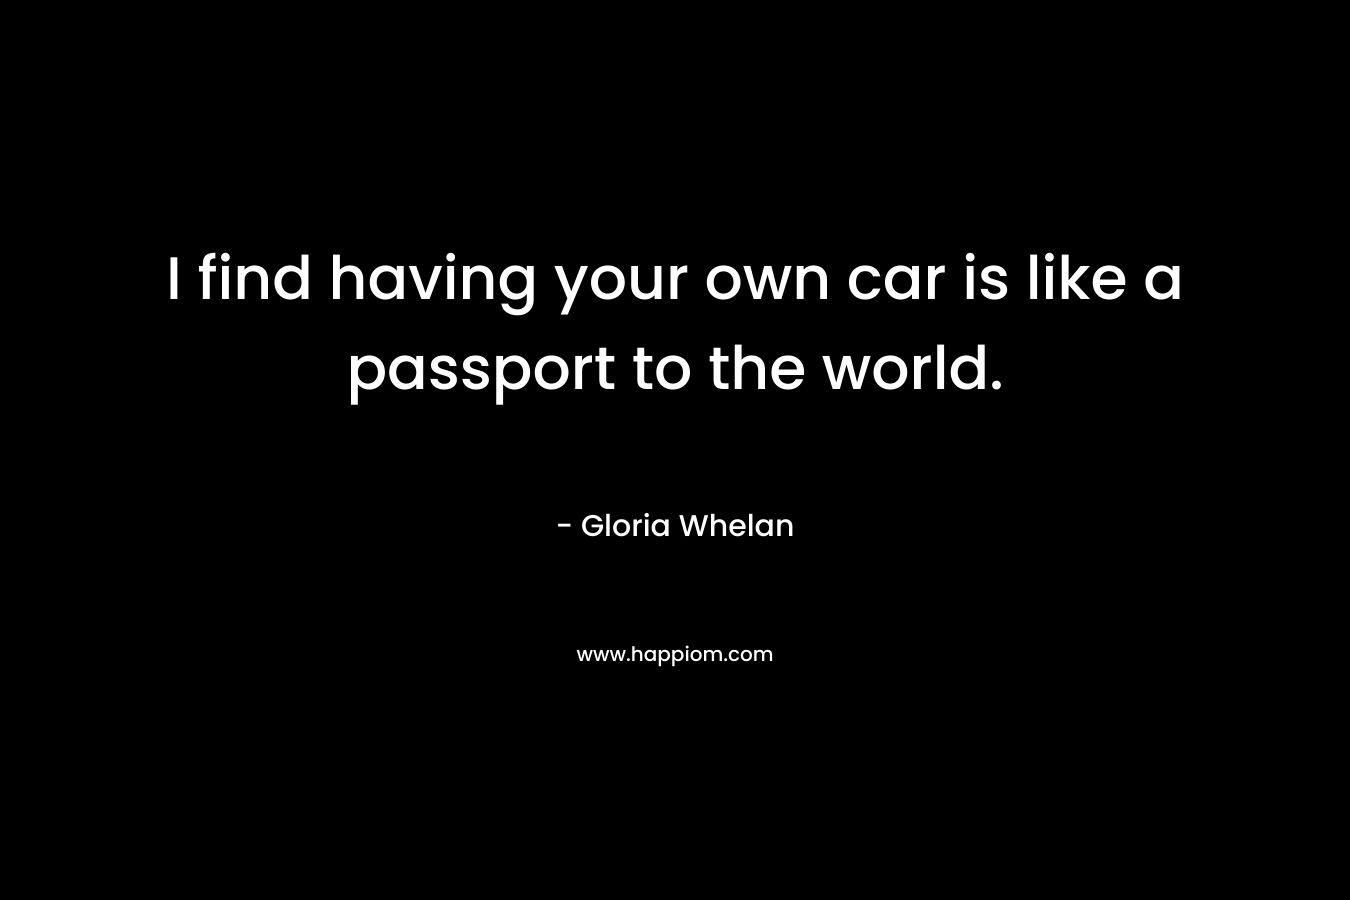 I find having your own car is like a passport to the world. – Gloria Whelan